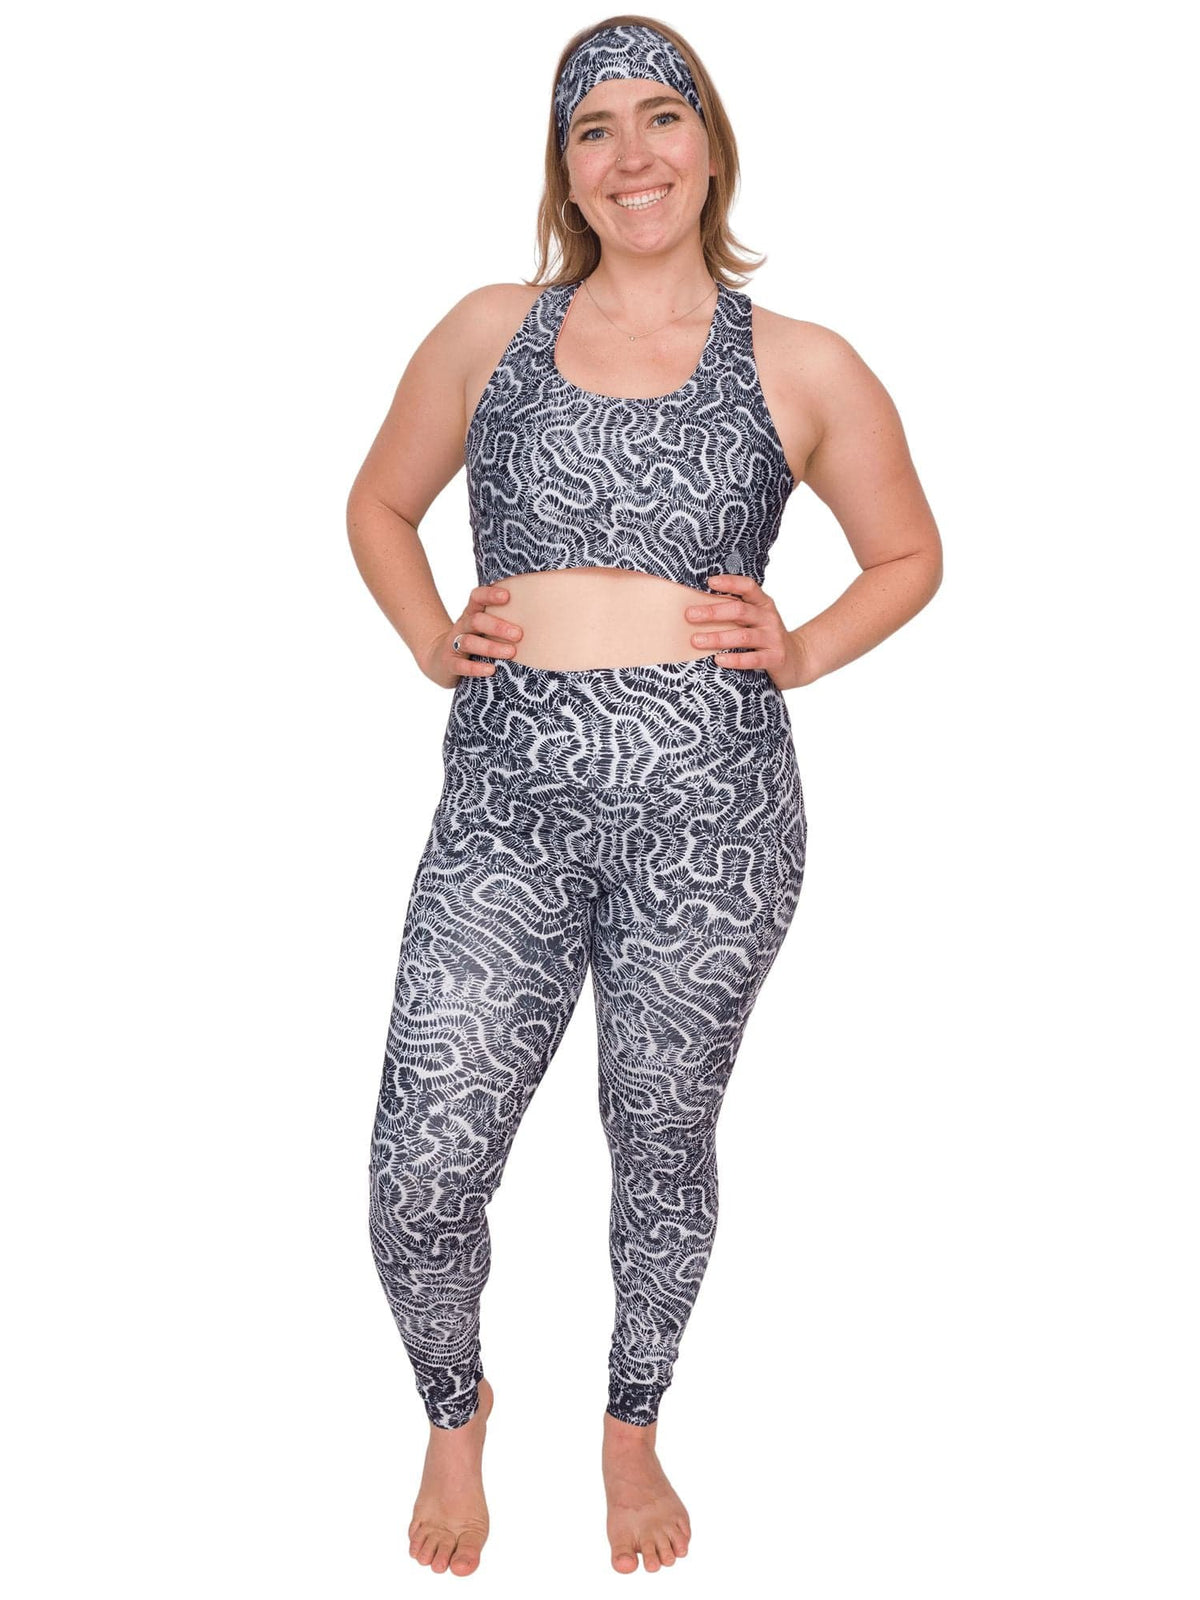 Model: Erin is a yoga instructor and coral restoration scientist. She is 5&#39;9&quot;, 170lbs, and is wearing a size L Reversible Top and Legging.